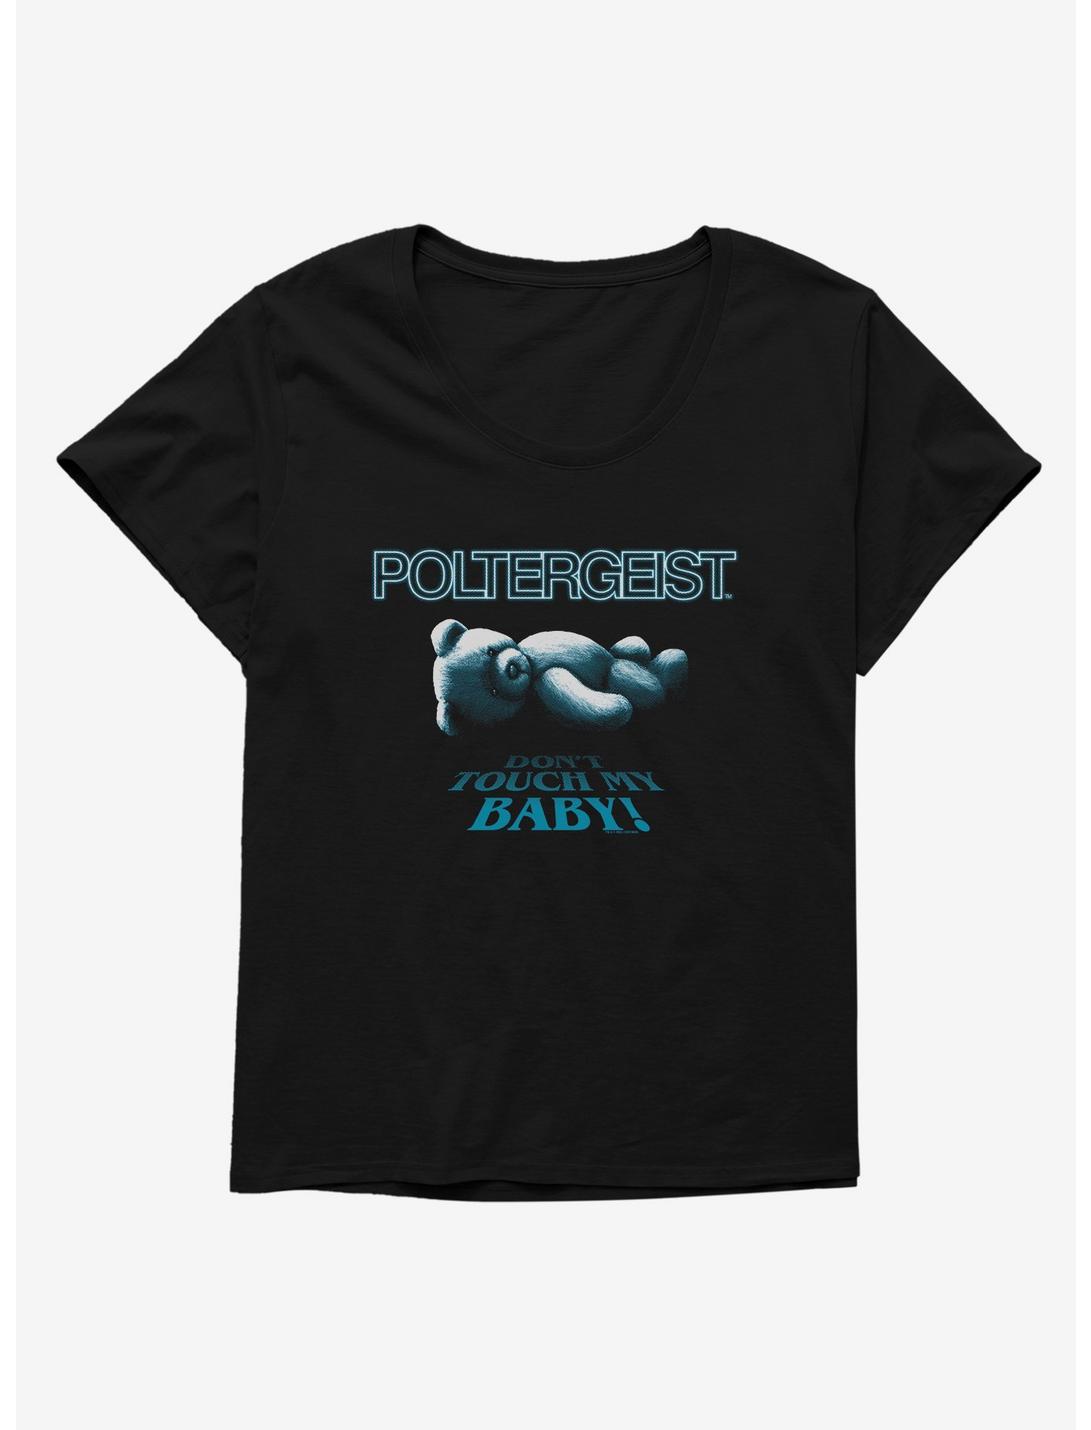 Poltergeist Don't Touch My Baby! Womens T-Shirt Plus Size, BLACK, hi-res